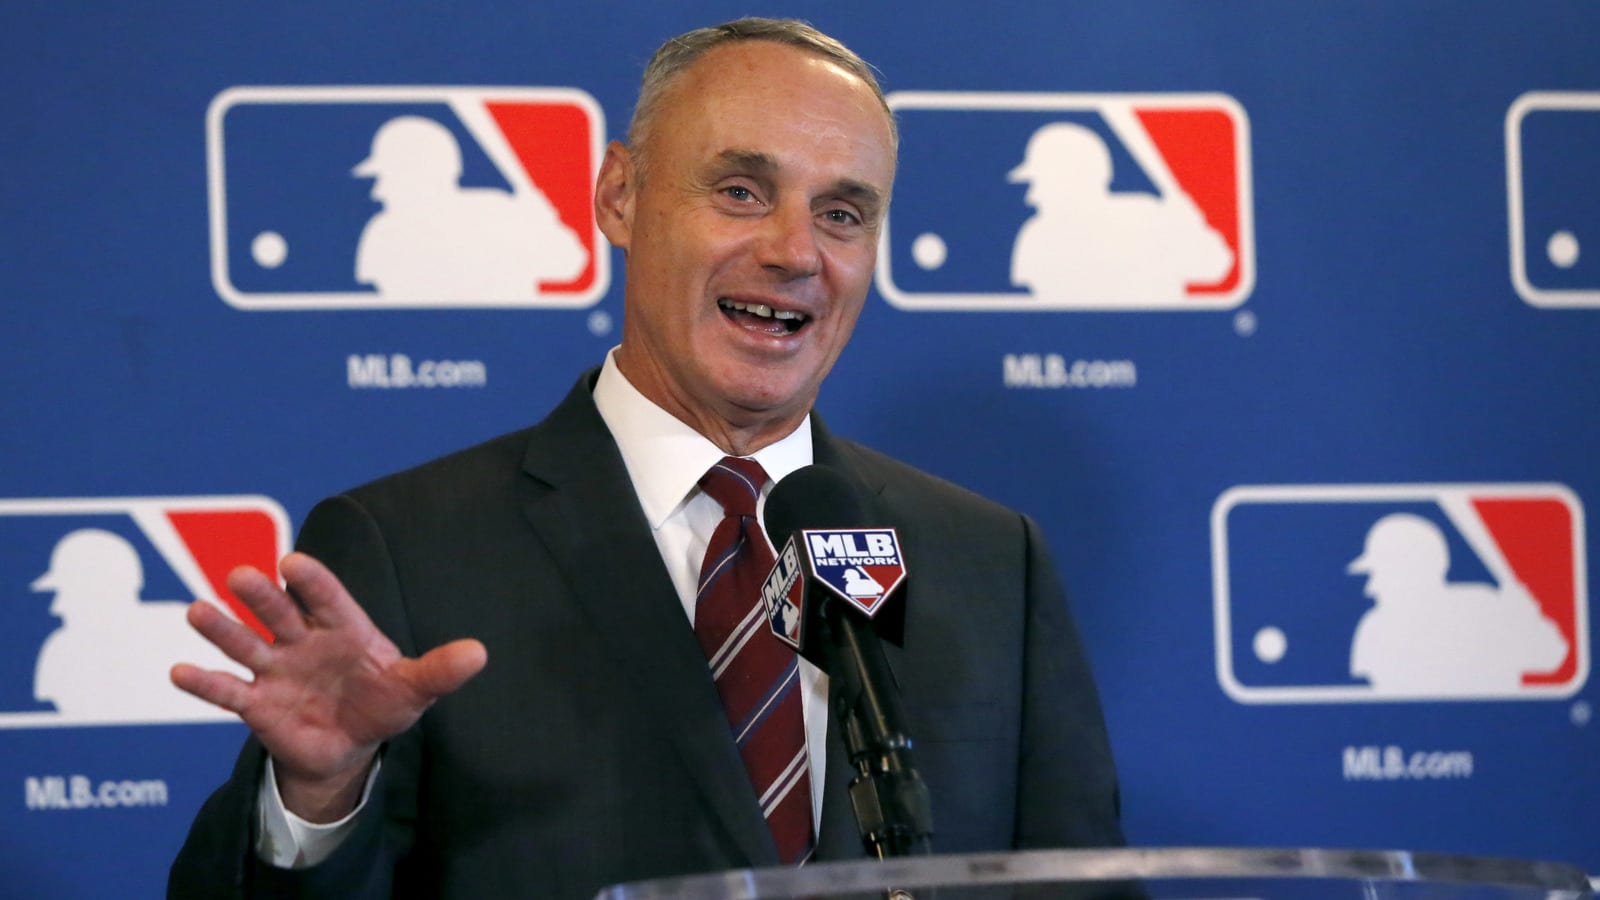 Baseball’s idea of an international draft is a swing and a miss